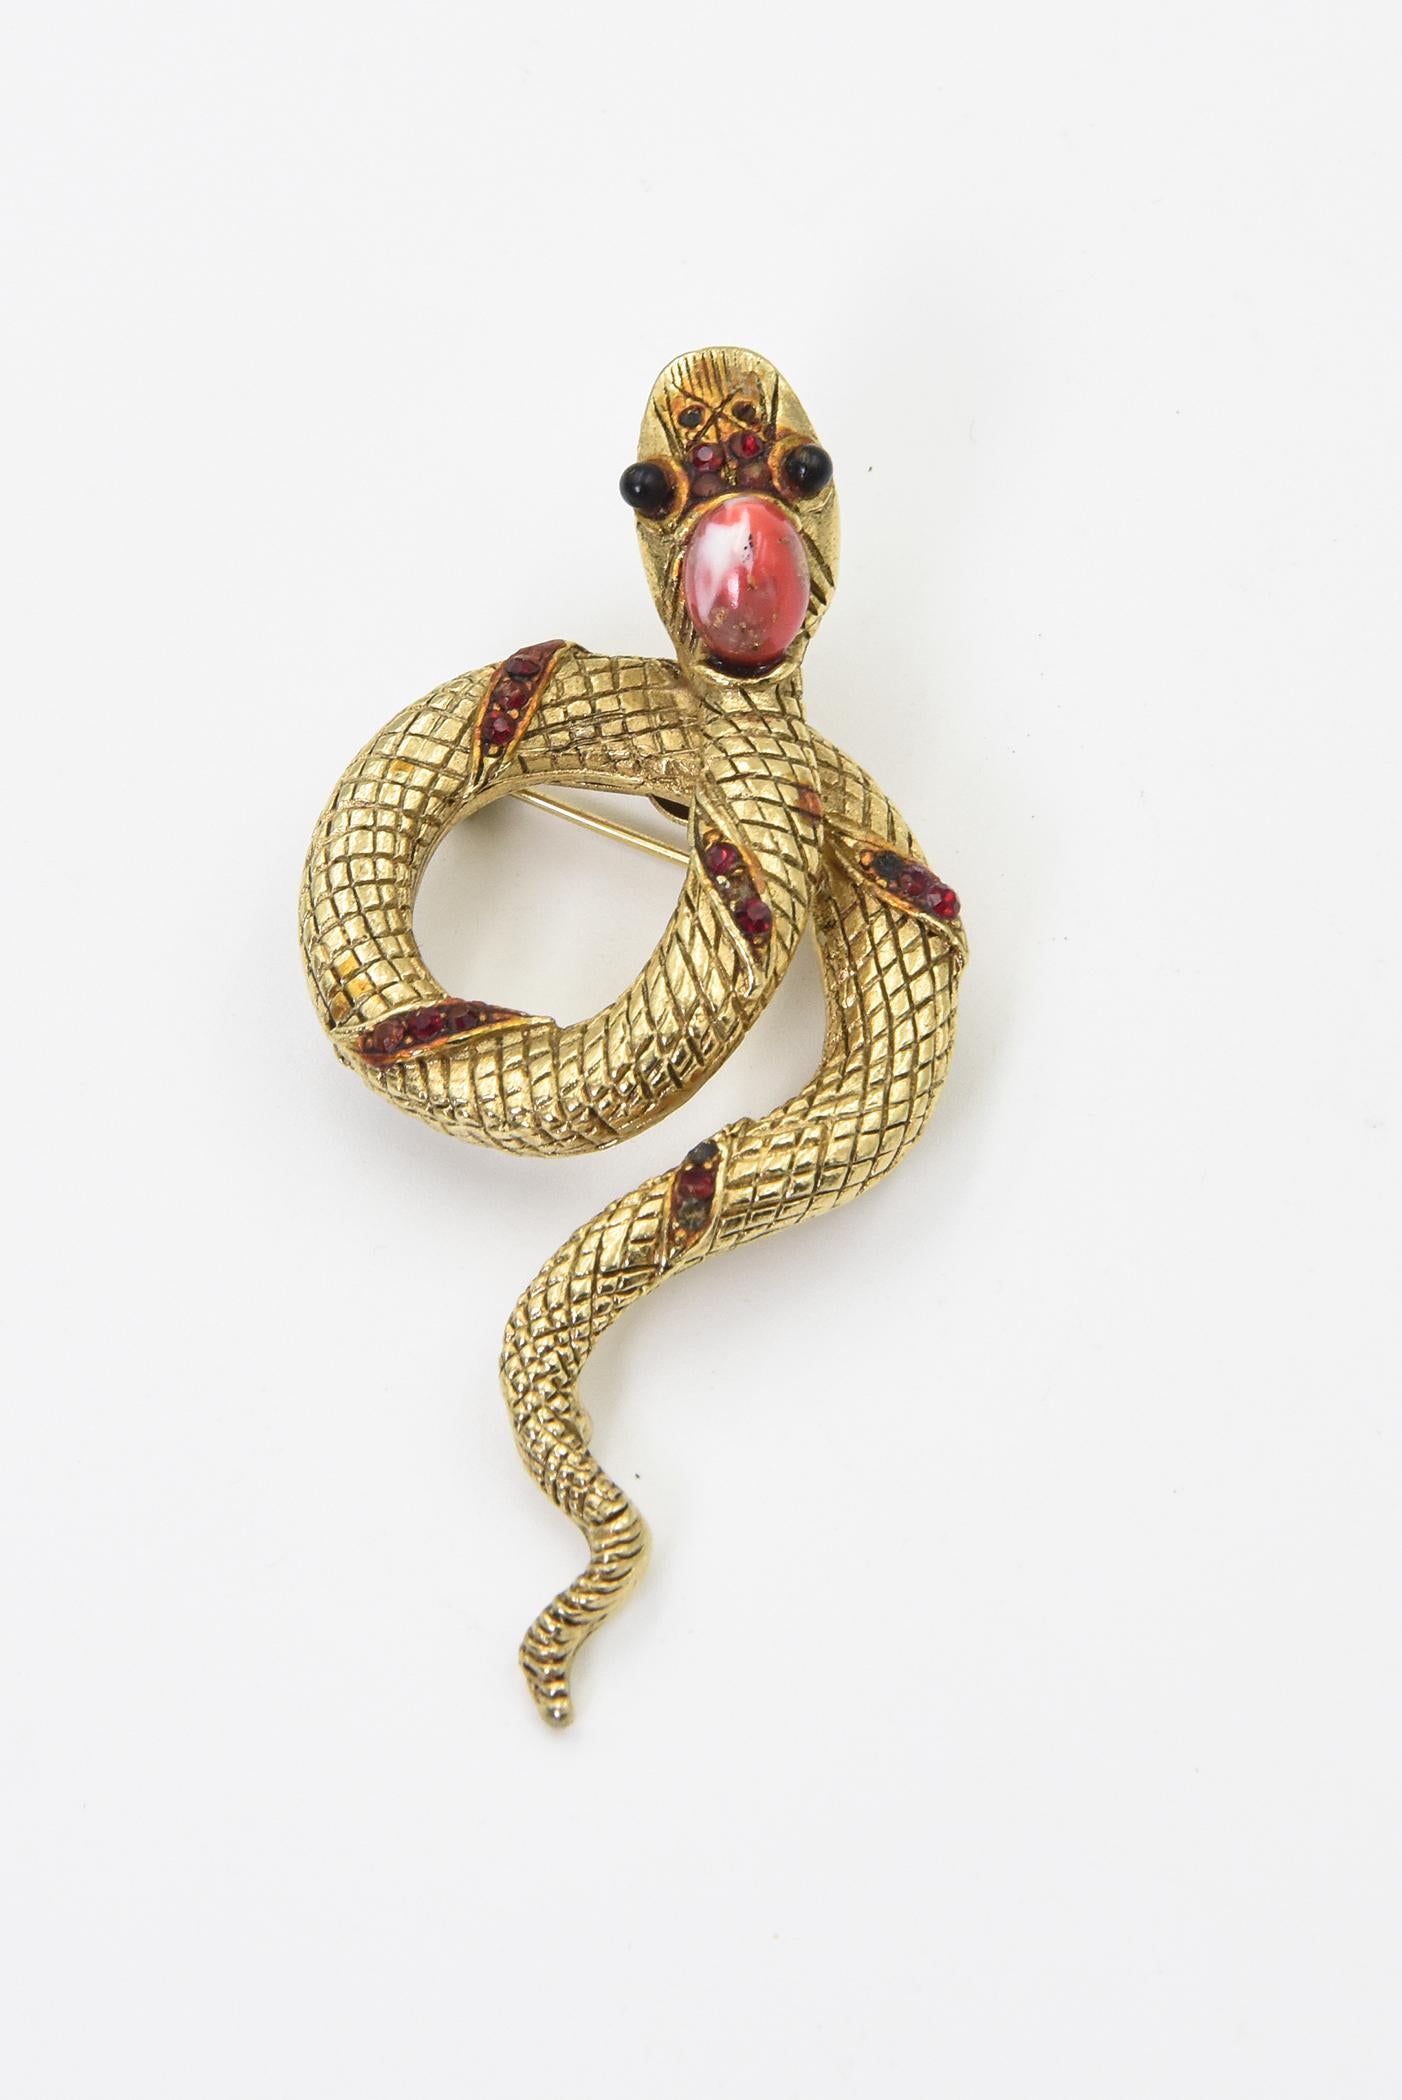 Adorable smiling or maybe hungry gold tone snake brooch featuring a highly stylized snake with rhinestone red bands and black beady eyes.